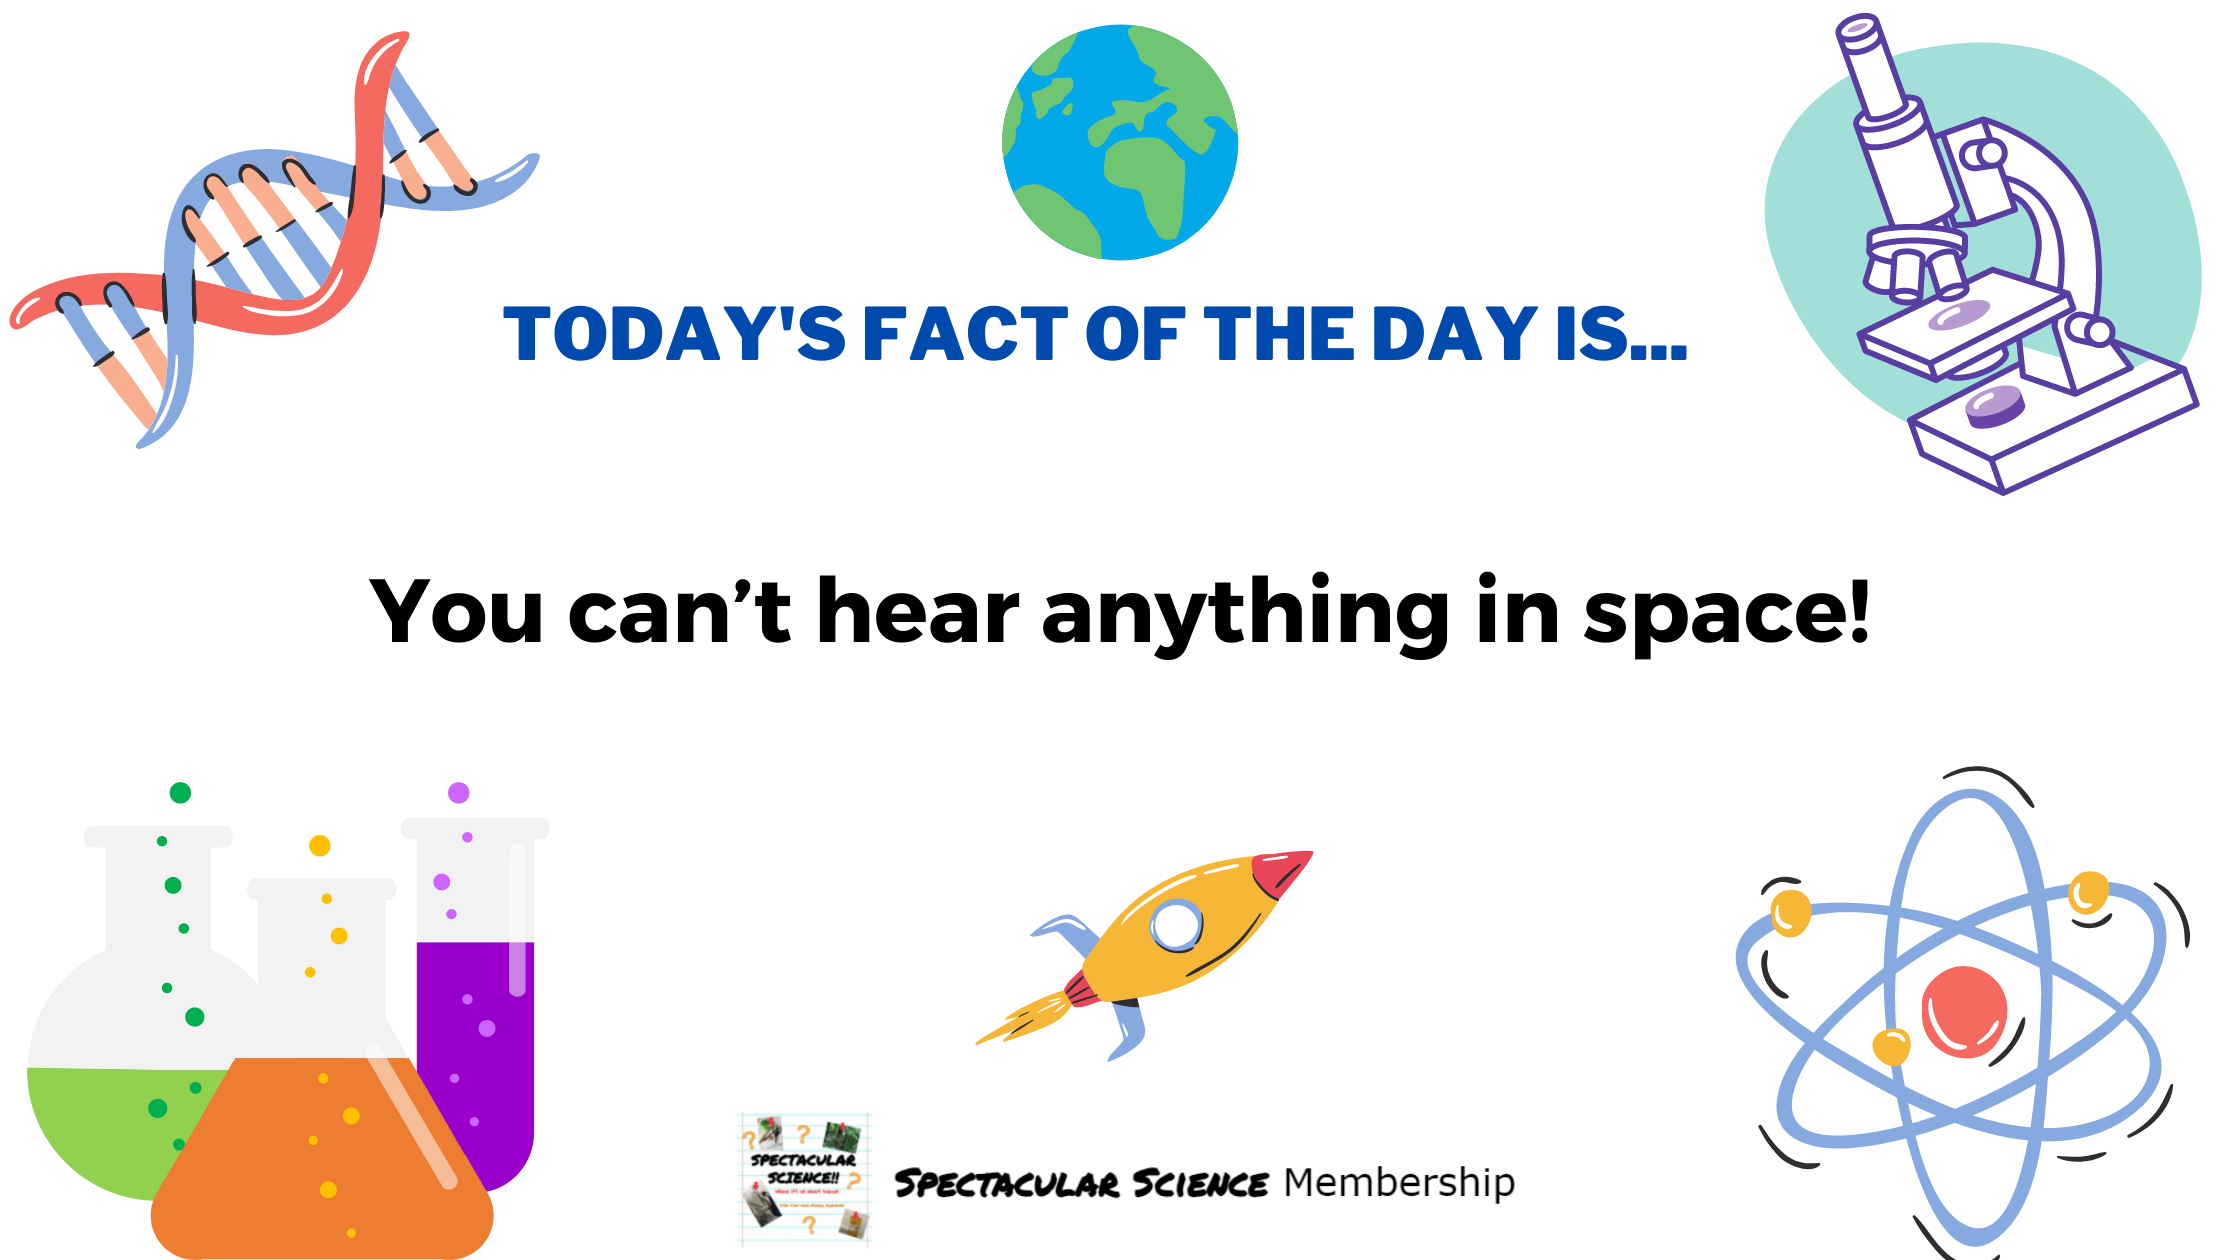 Fact of the Day Image Nov. 13th